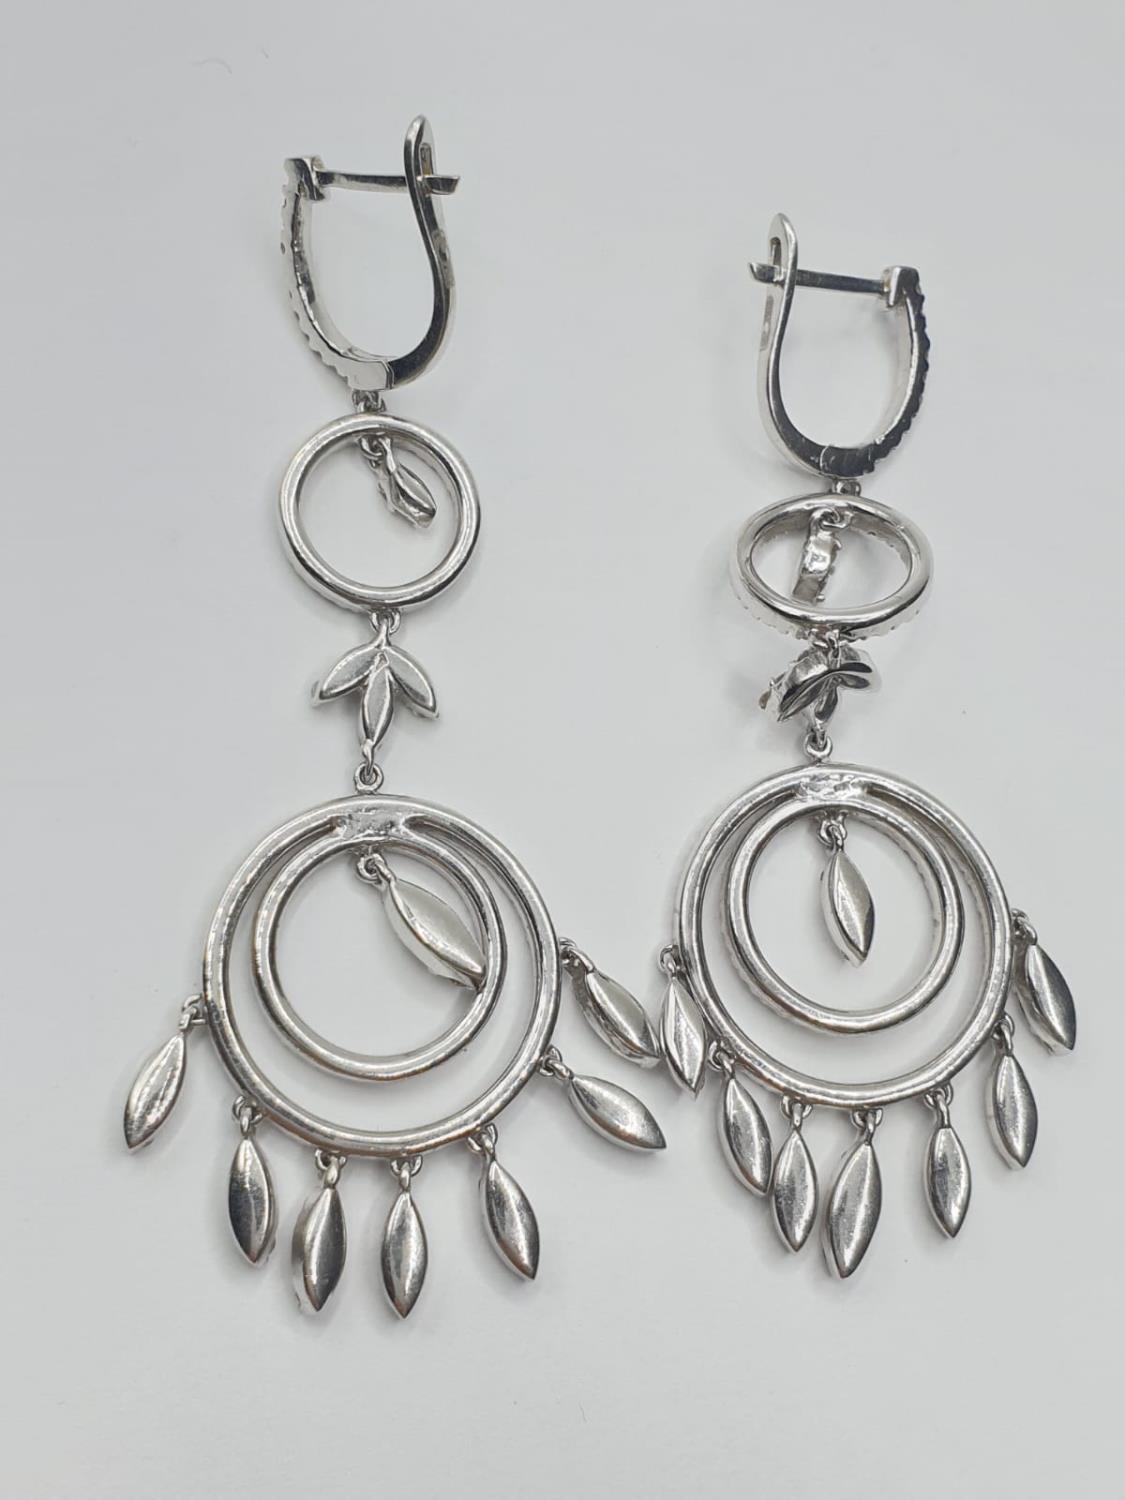 Pair of 18ct white gold and diamond drop earrings in the shape of dream catchers, weight 15.82g - Image 3 of 4